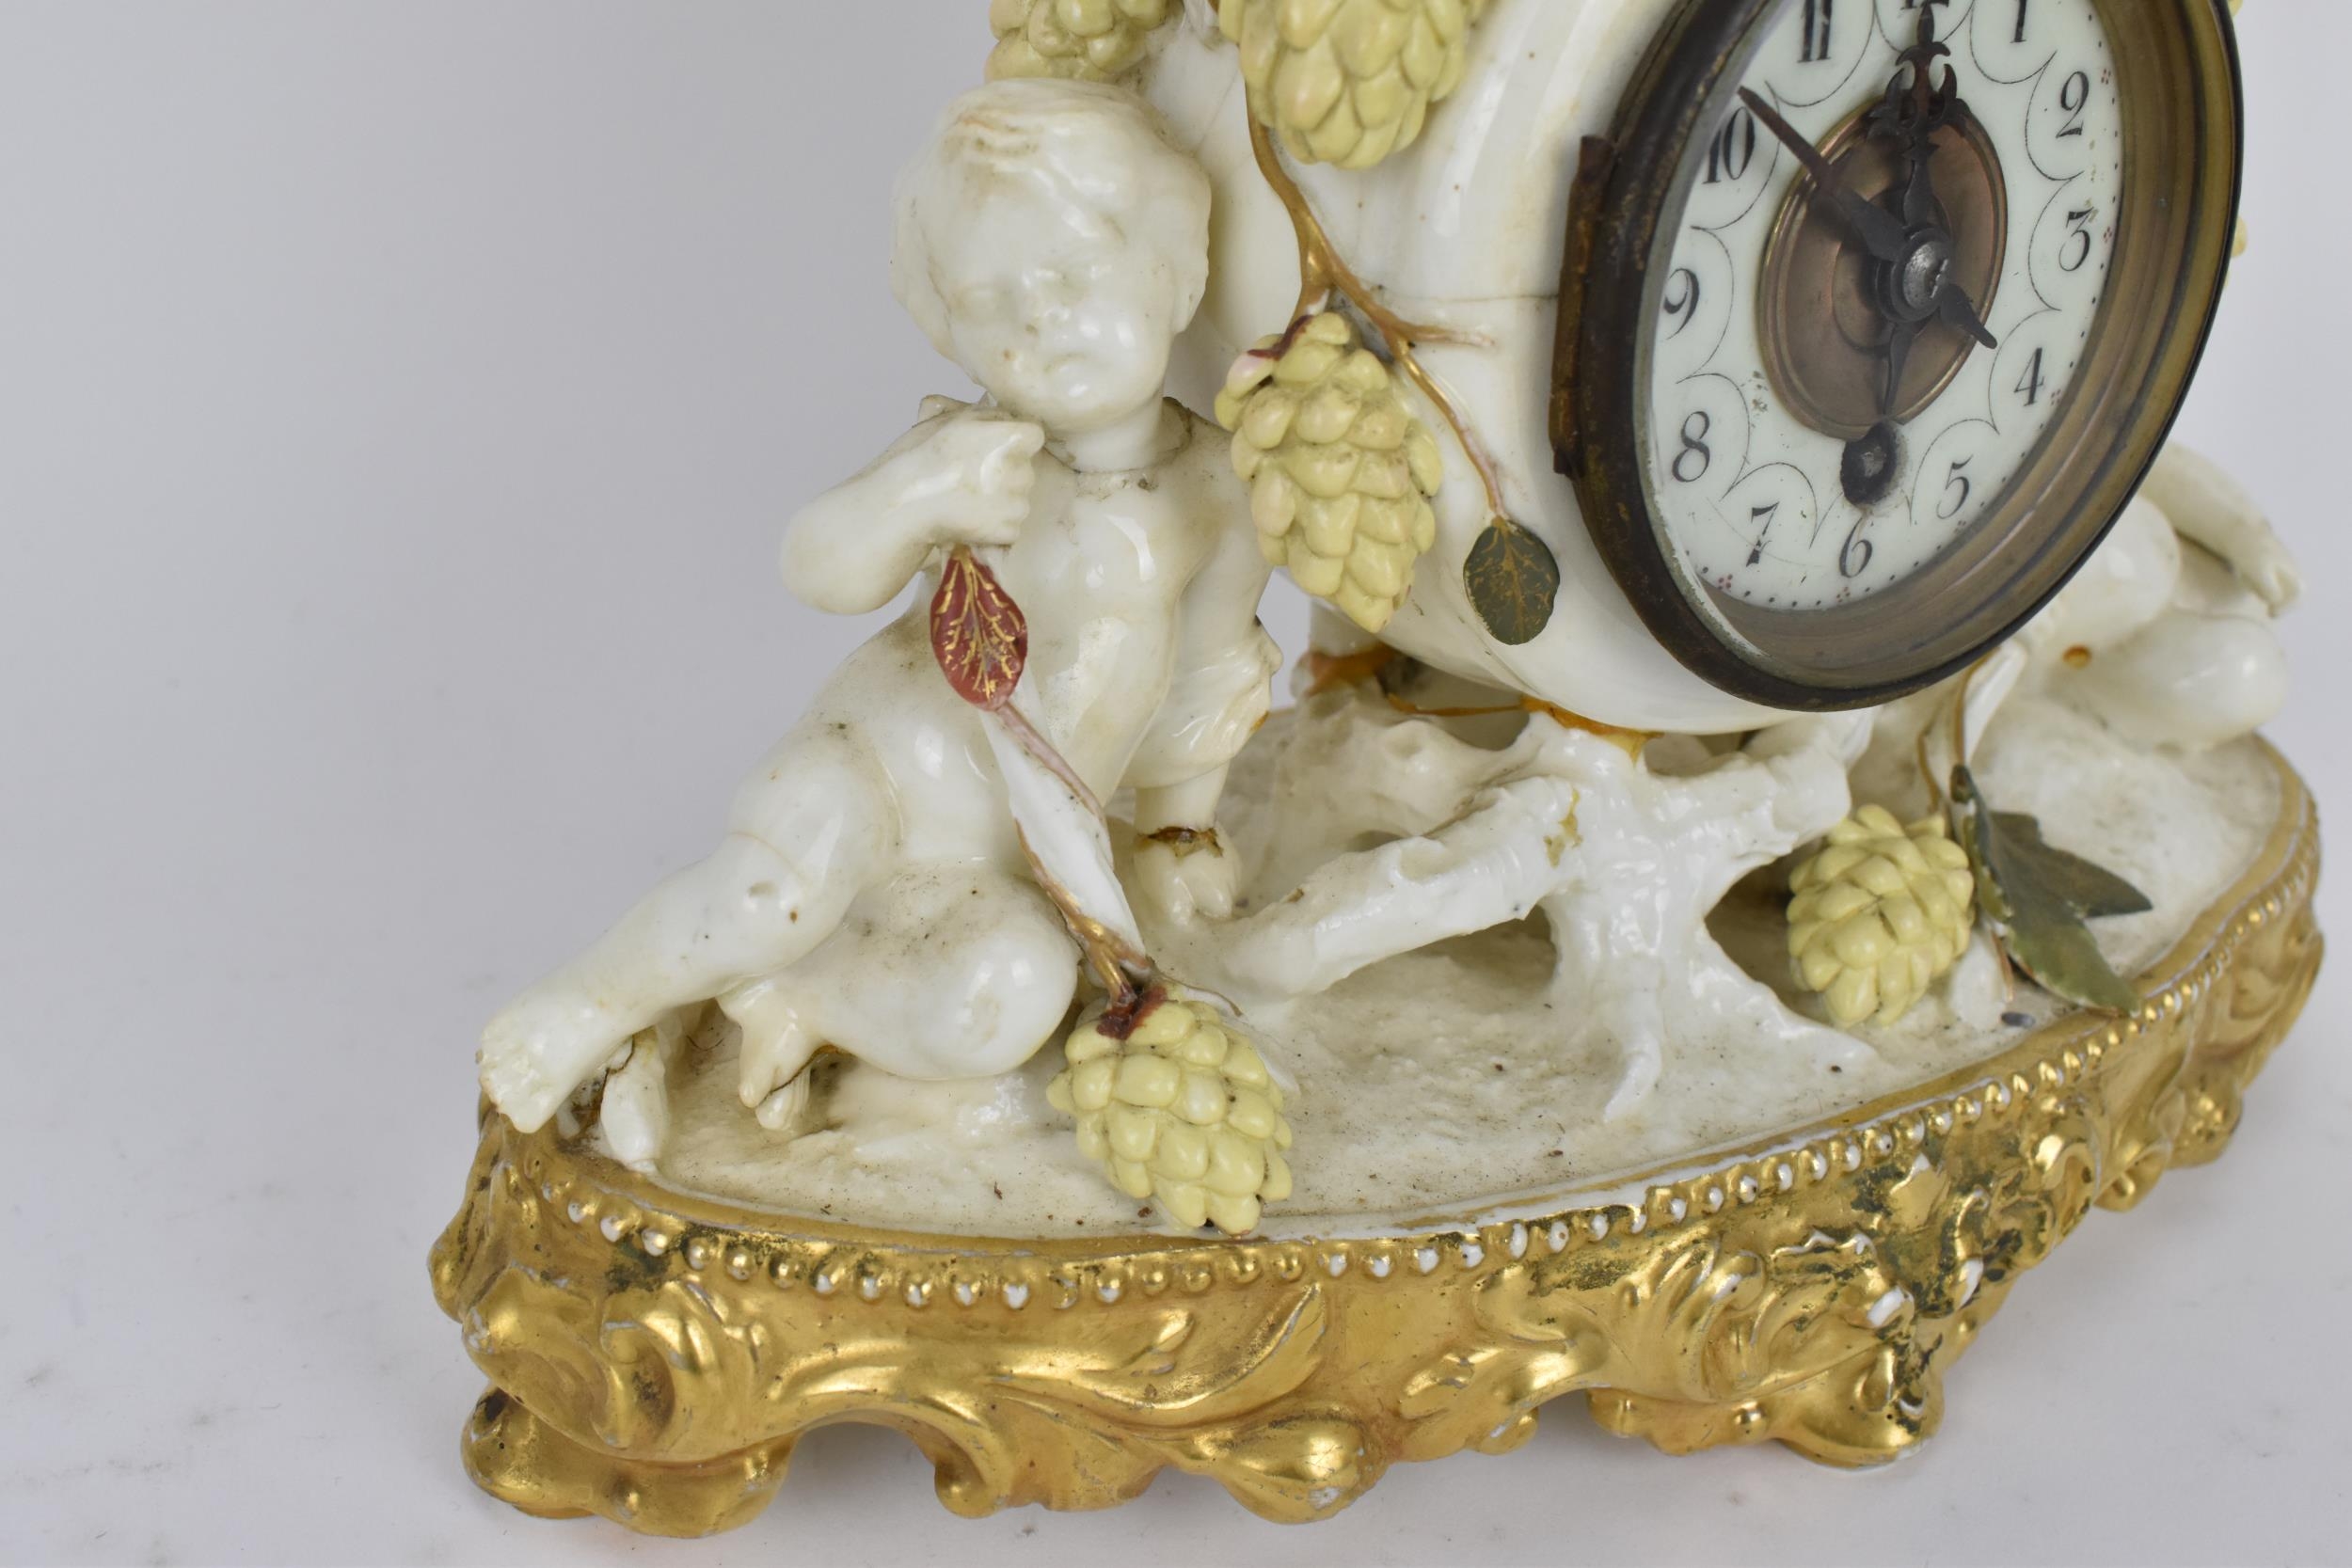 A late 19th century porcelain mantle clock, decorated with cherubs eating grapes on a gilded base, - Image 7 of 7